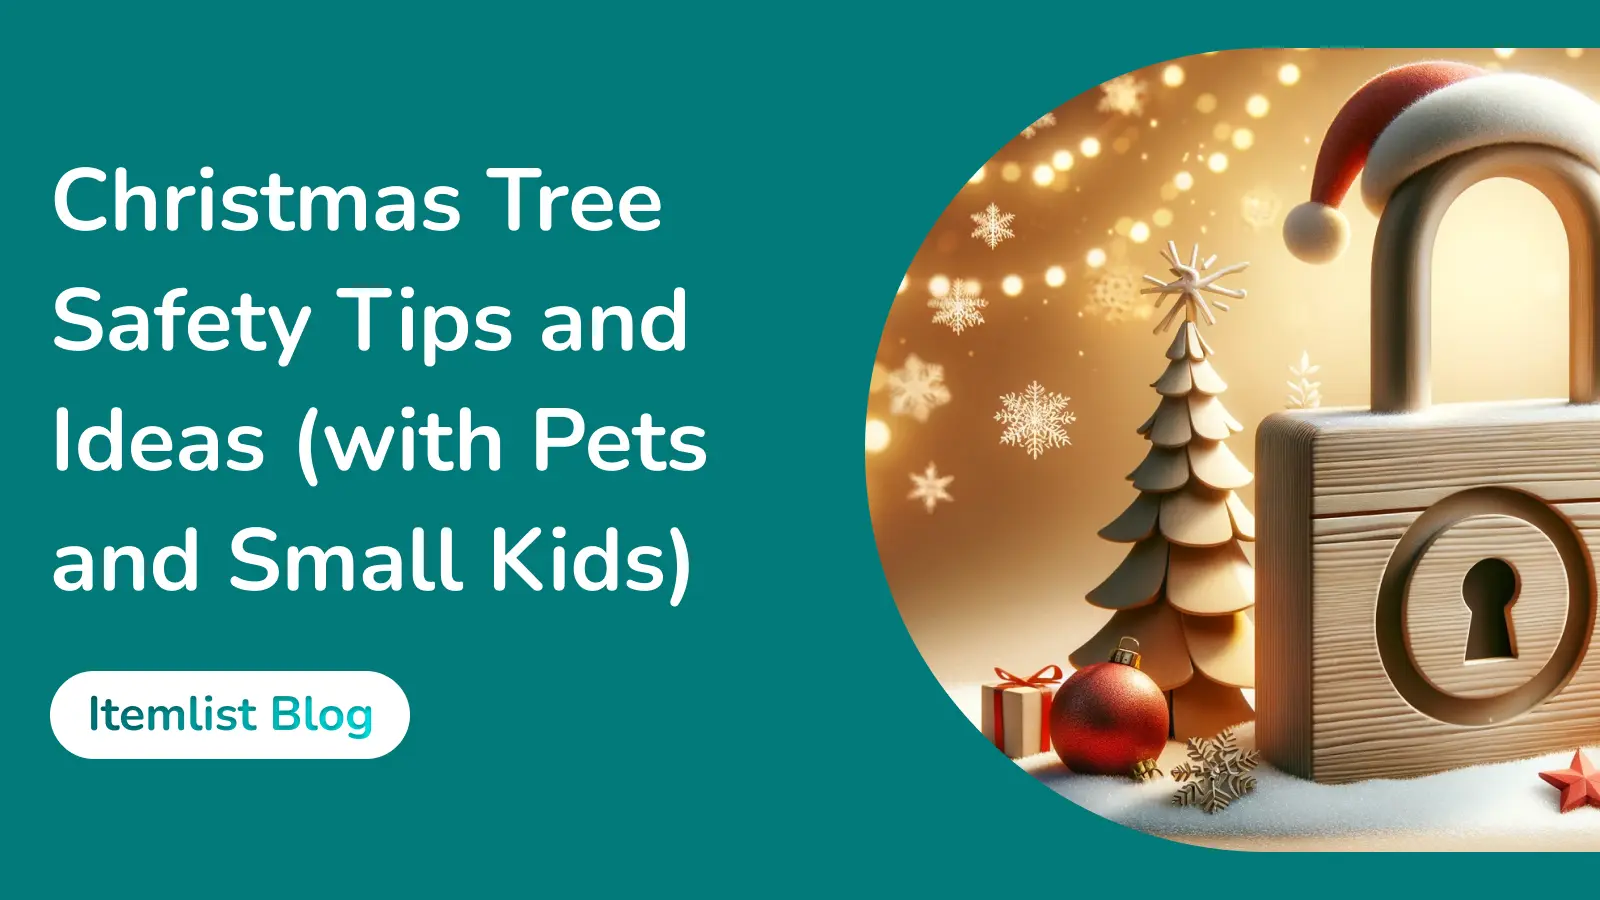 Christmas Tree Safety Tips and Ideas (with Pets and Small Kids)